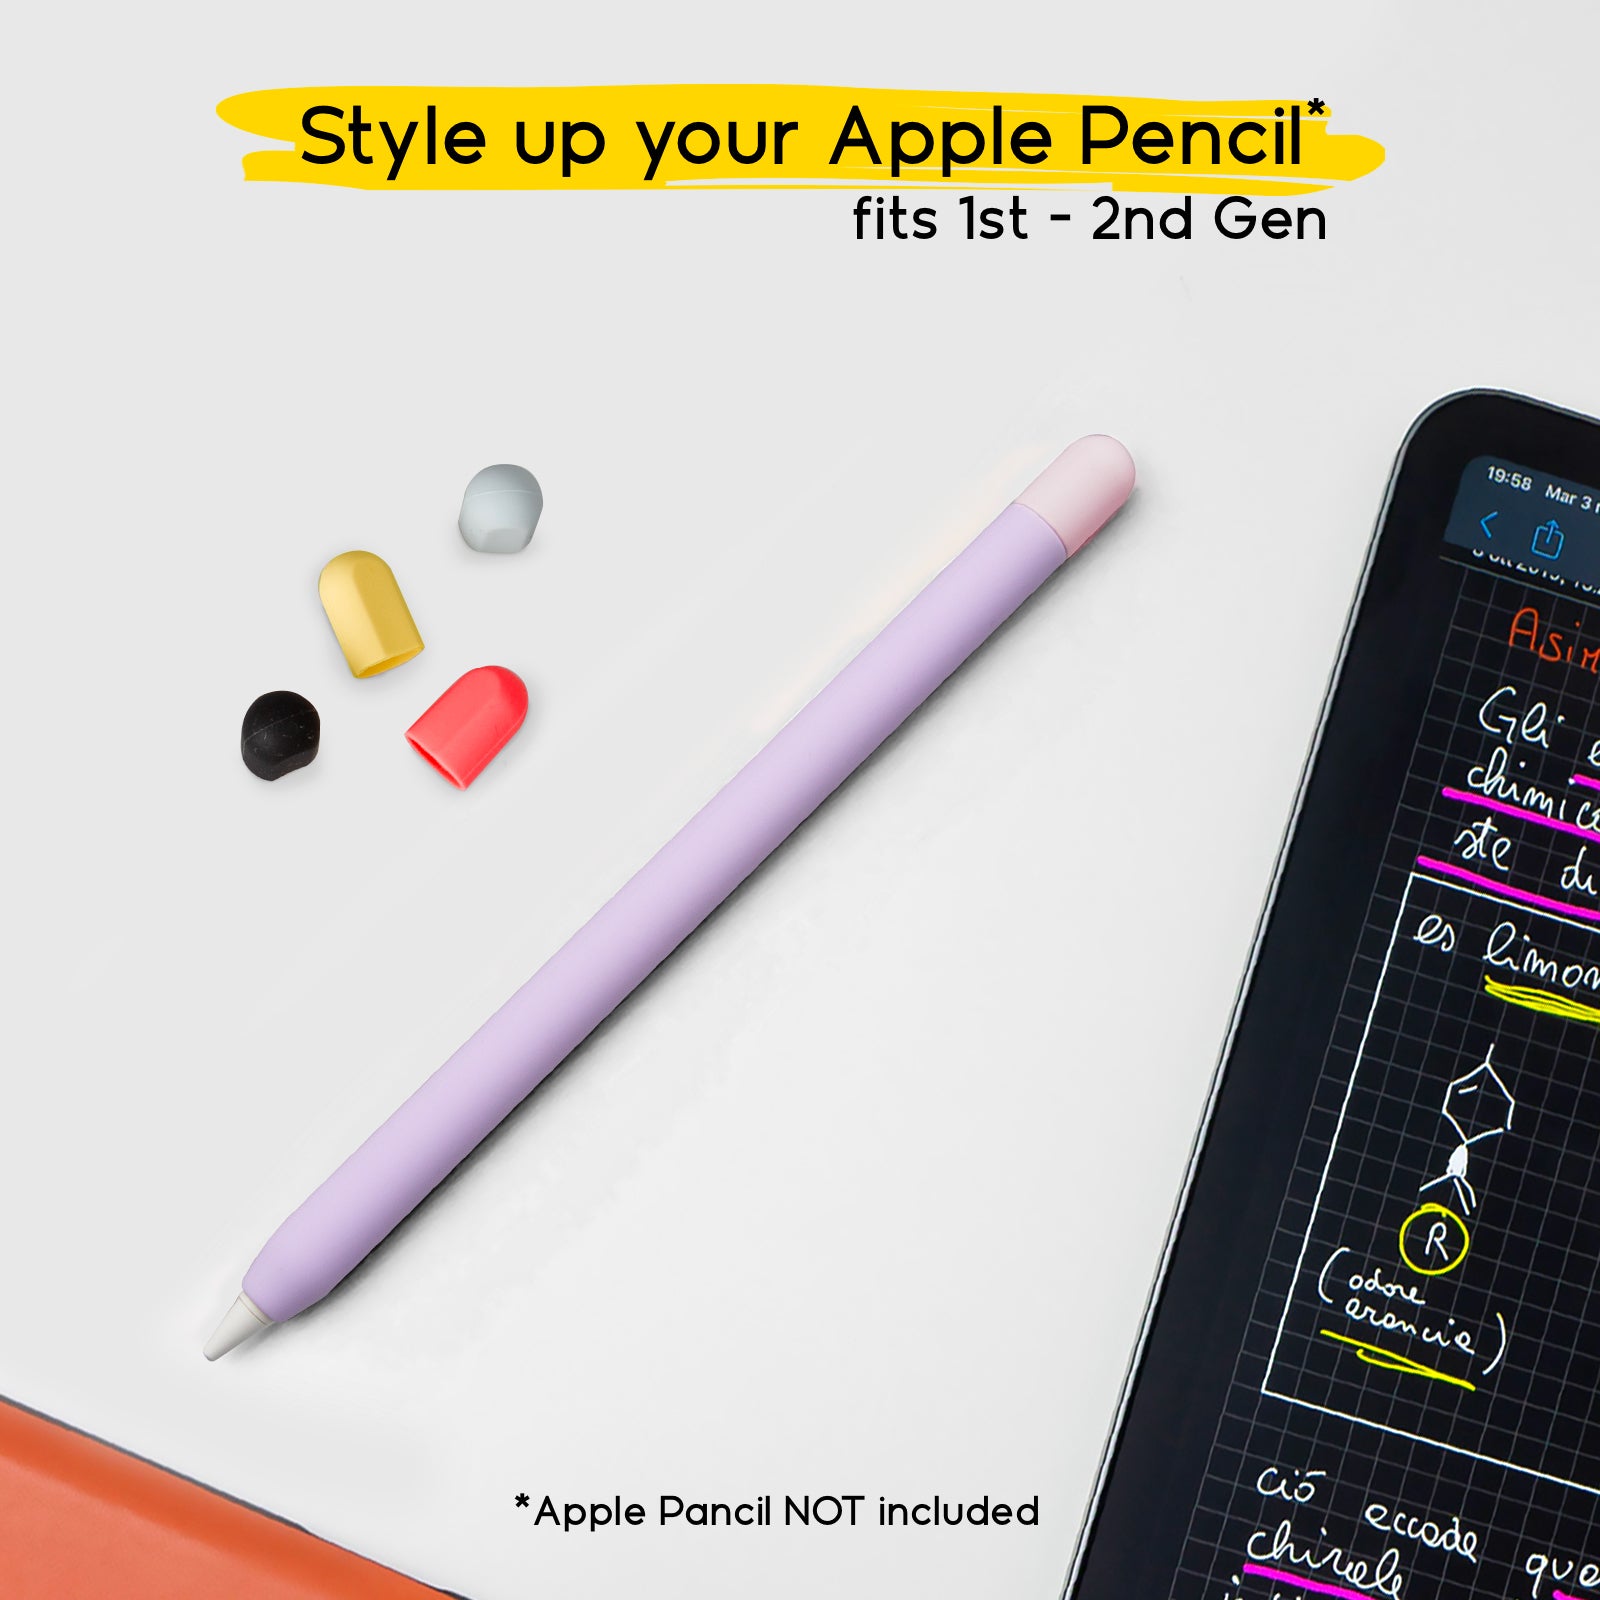 Lilac skin case for 1st and 2nd generation Apple Pencils with 5 colourful caps